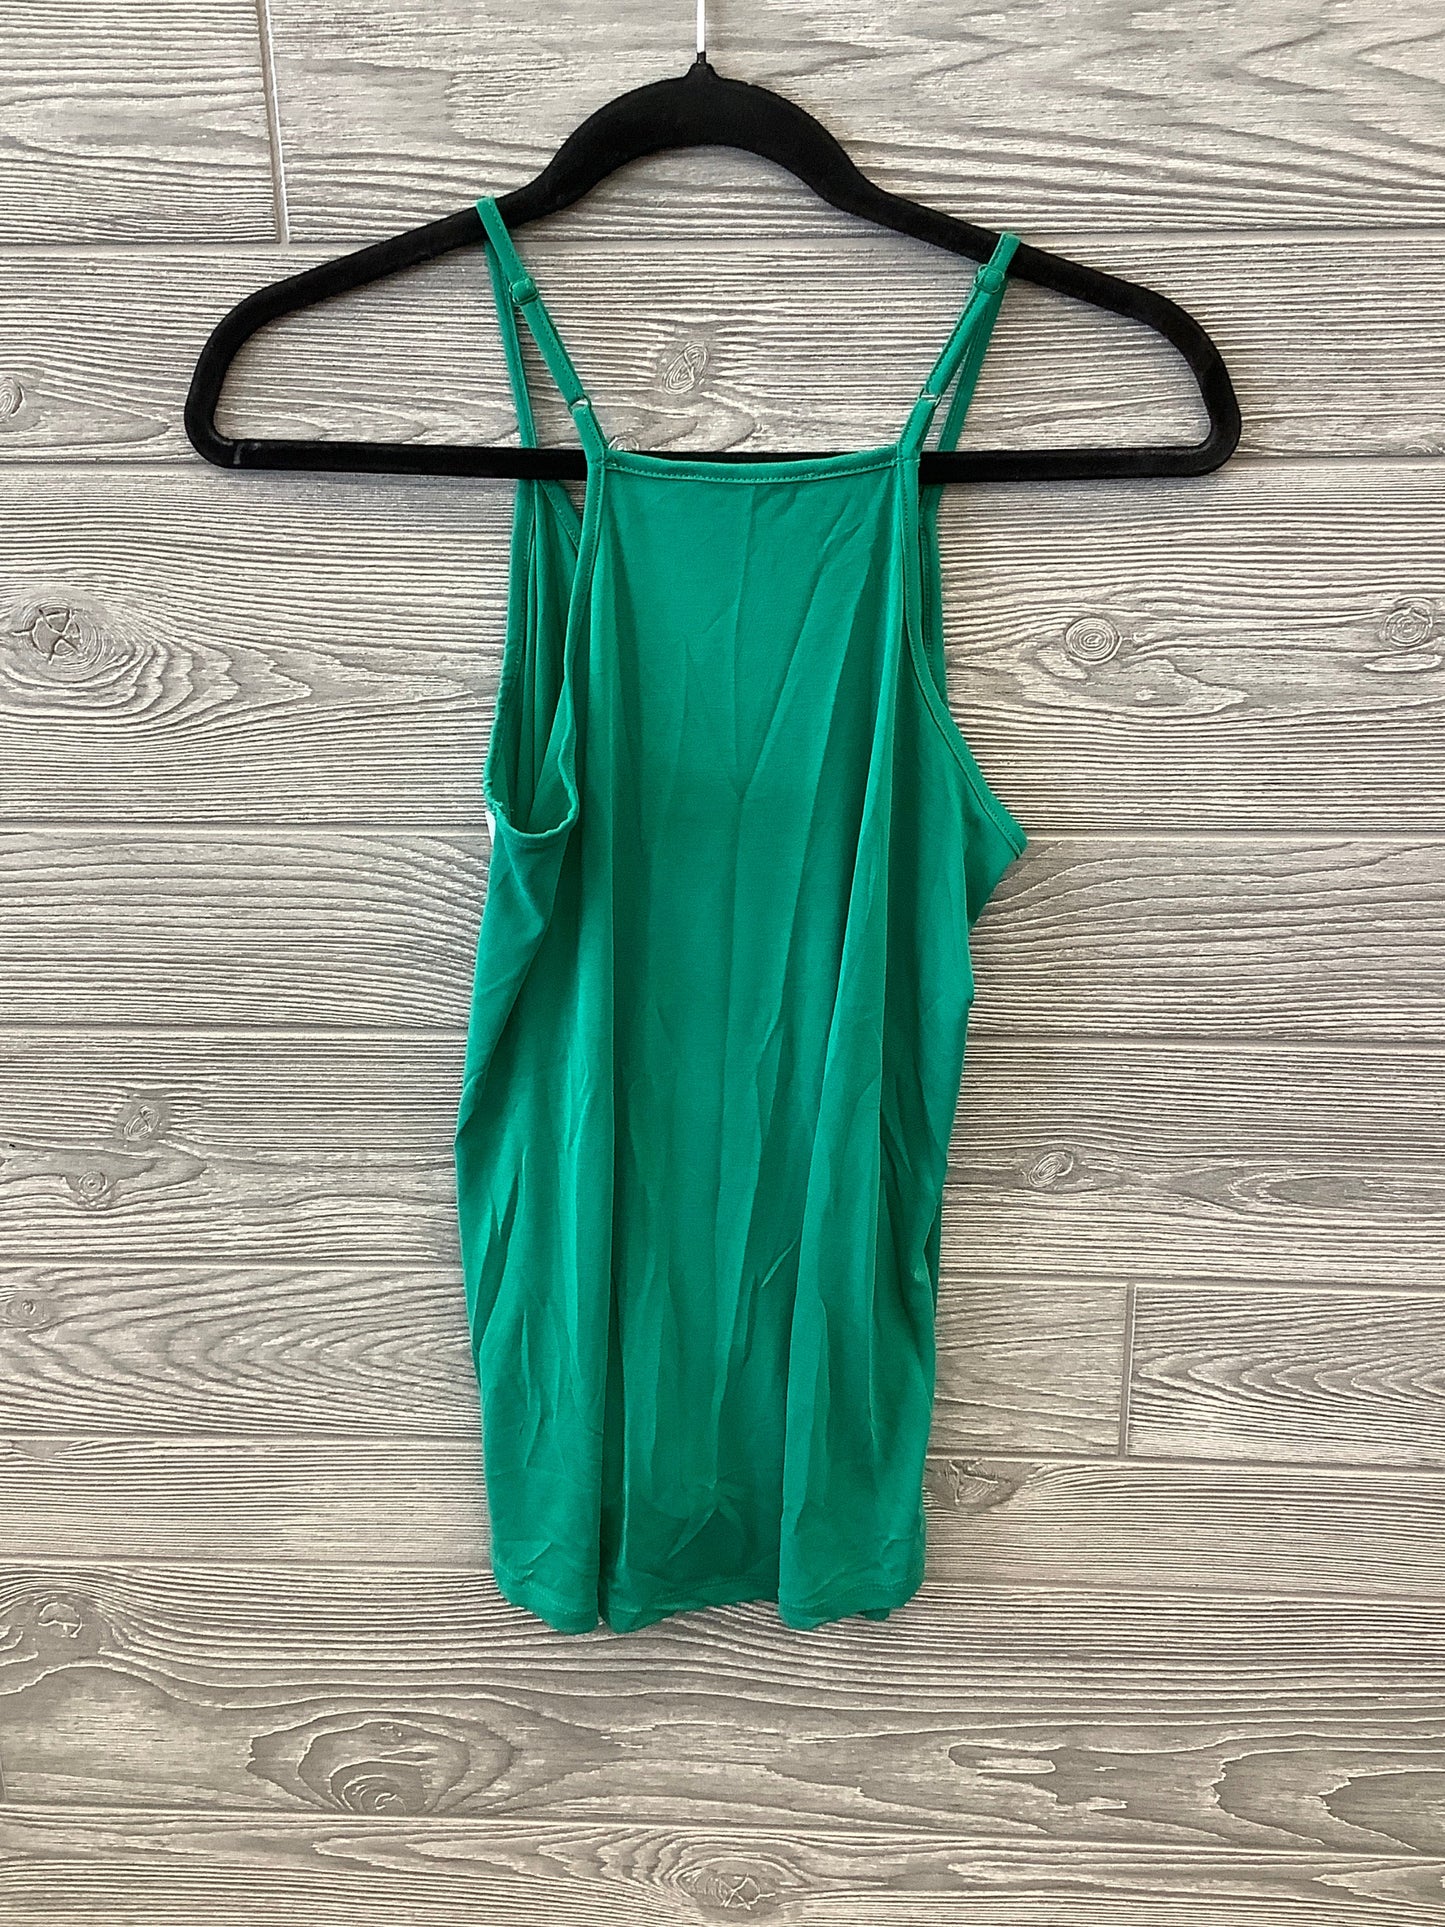 Green Top Sleeveless Maurices, Size S